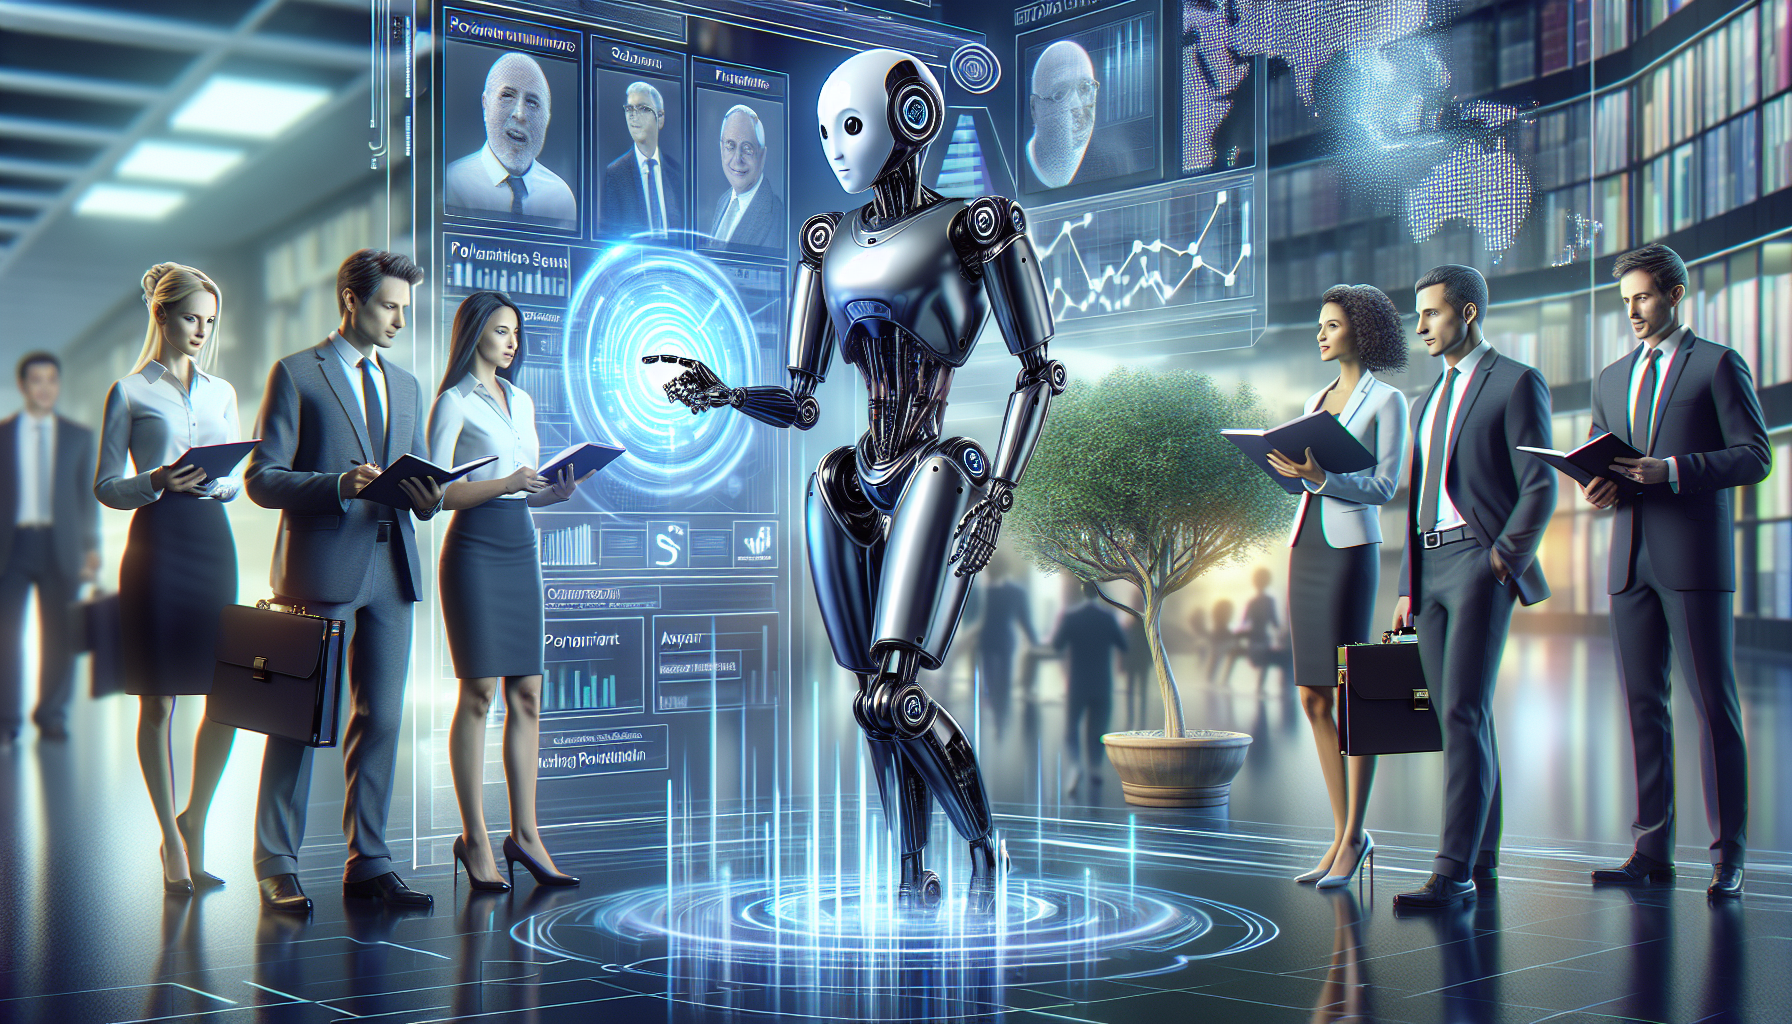 Illustration of AI Copilot assisting bankers and advisors